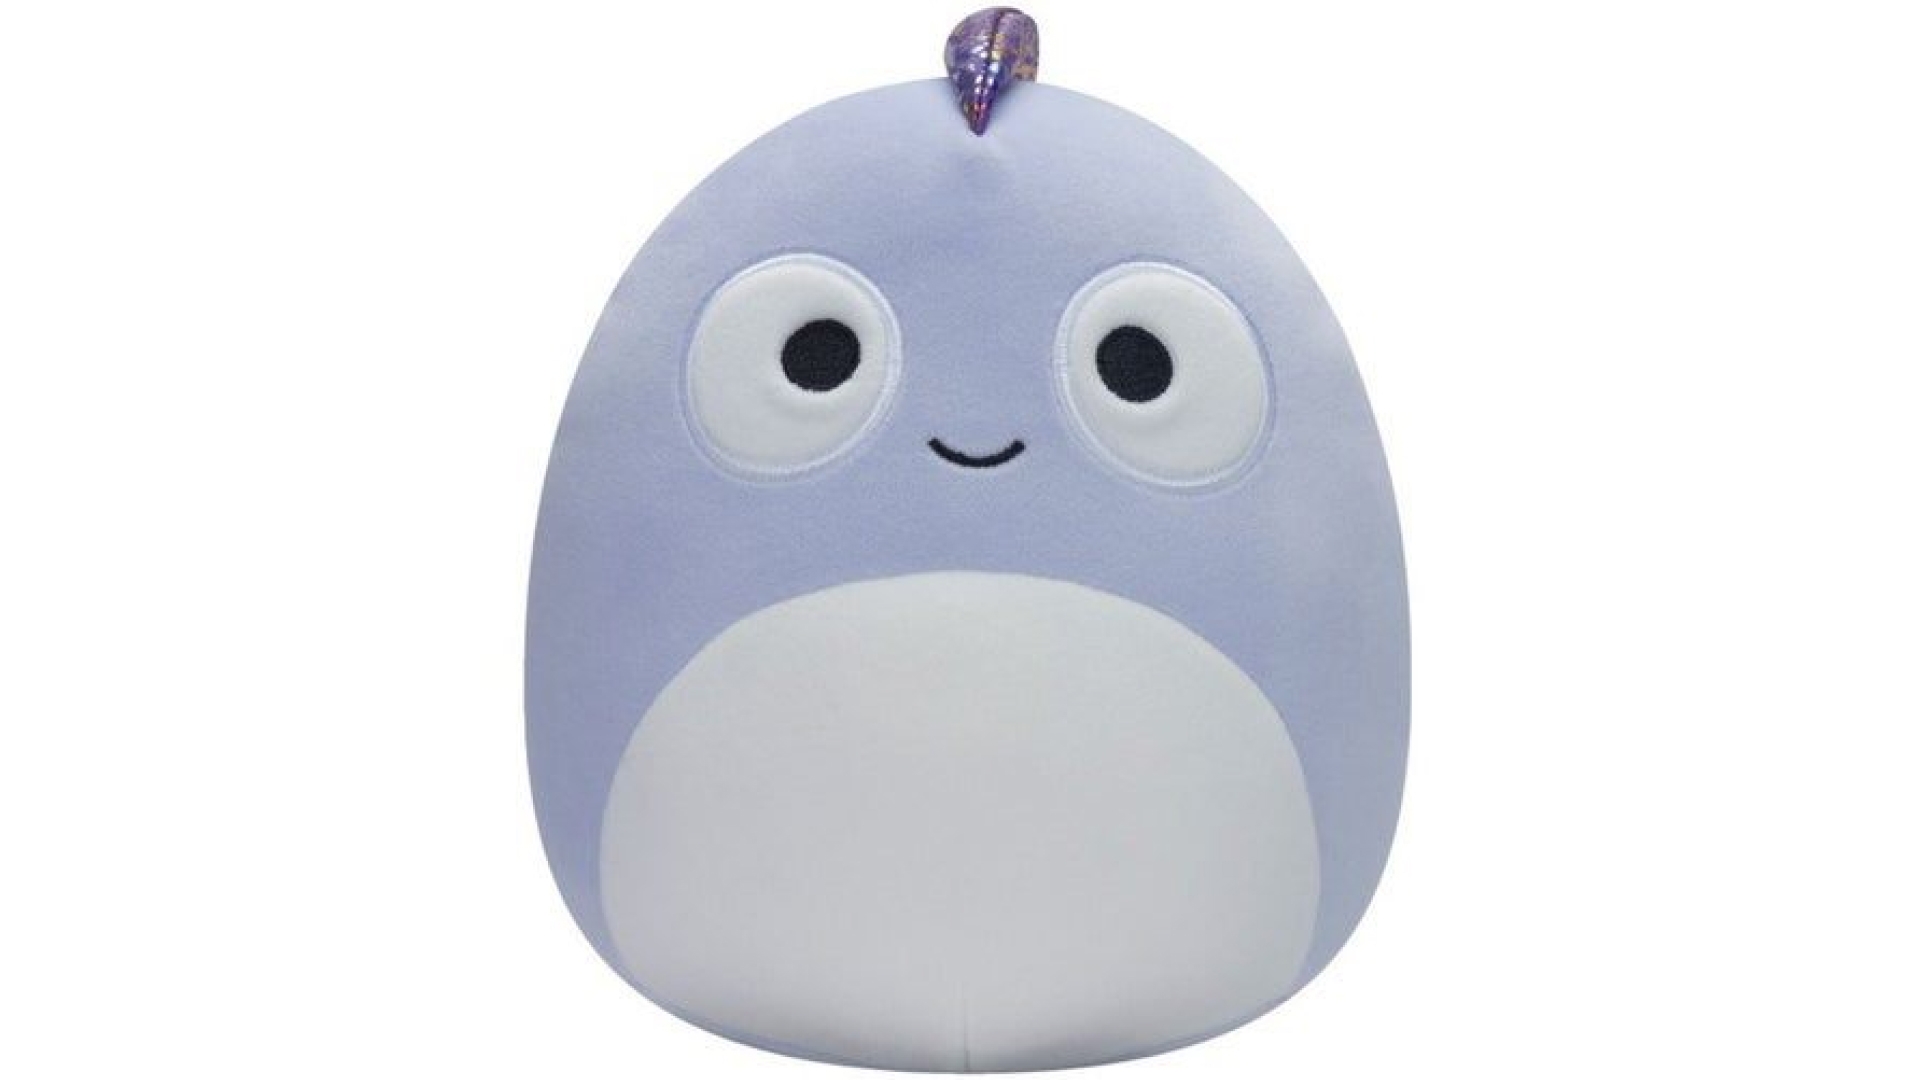 Squishmallow plush toy, highlighting its soft and huggable features in various cute designs.